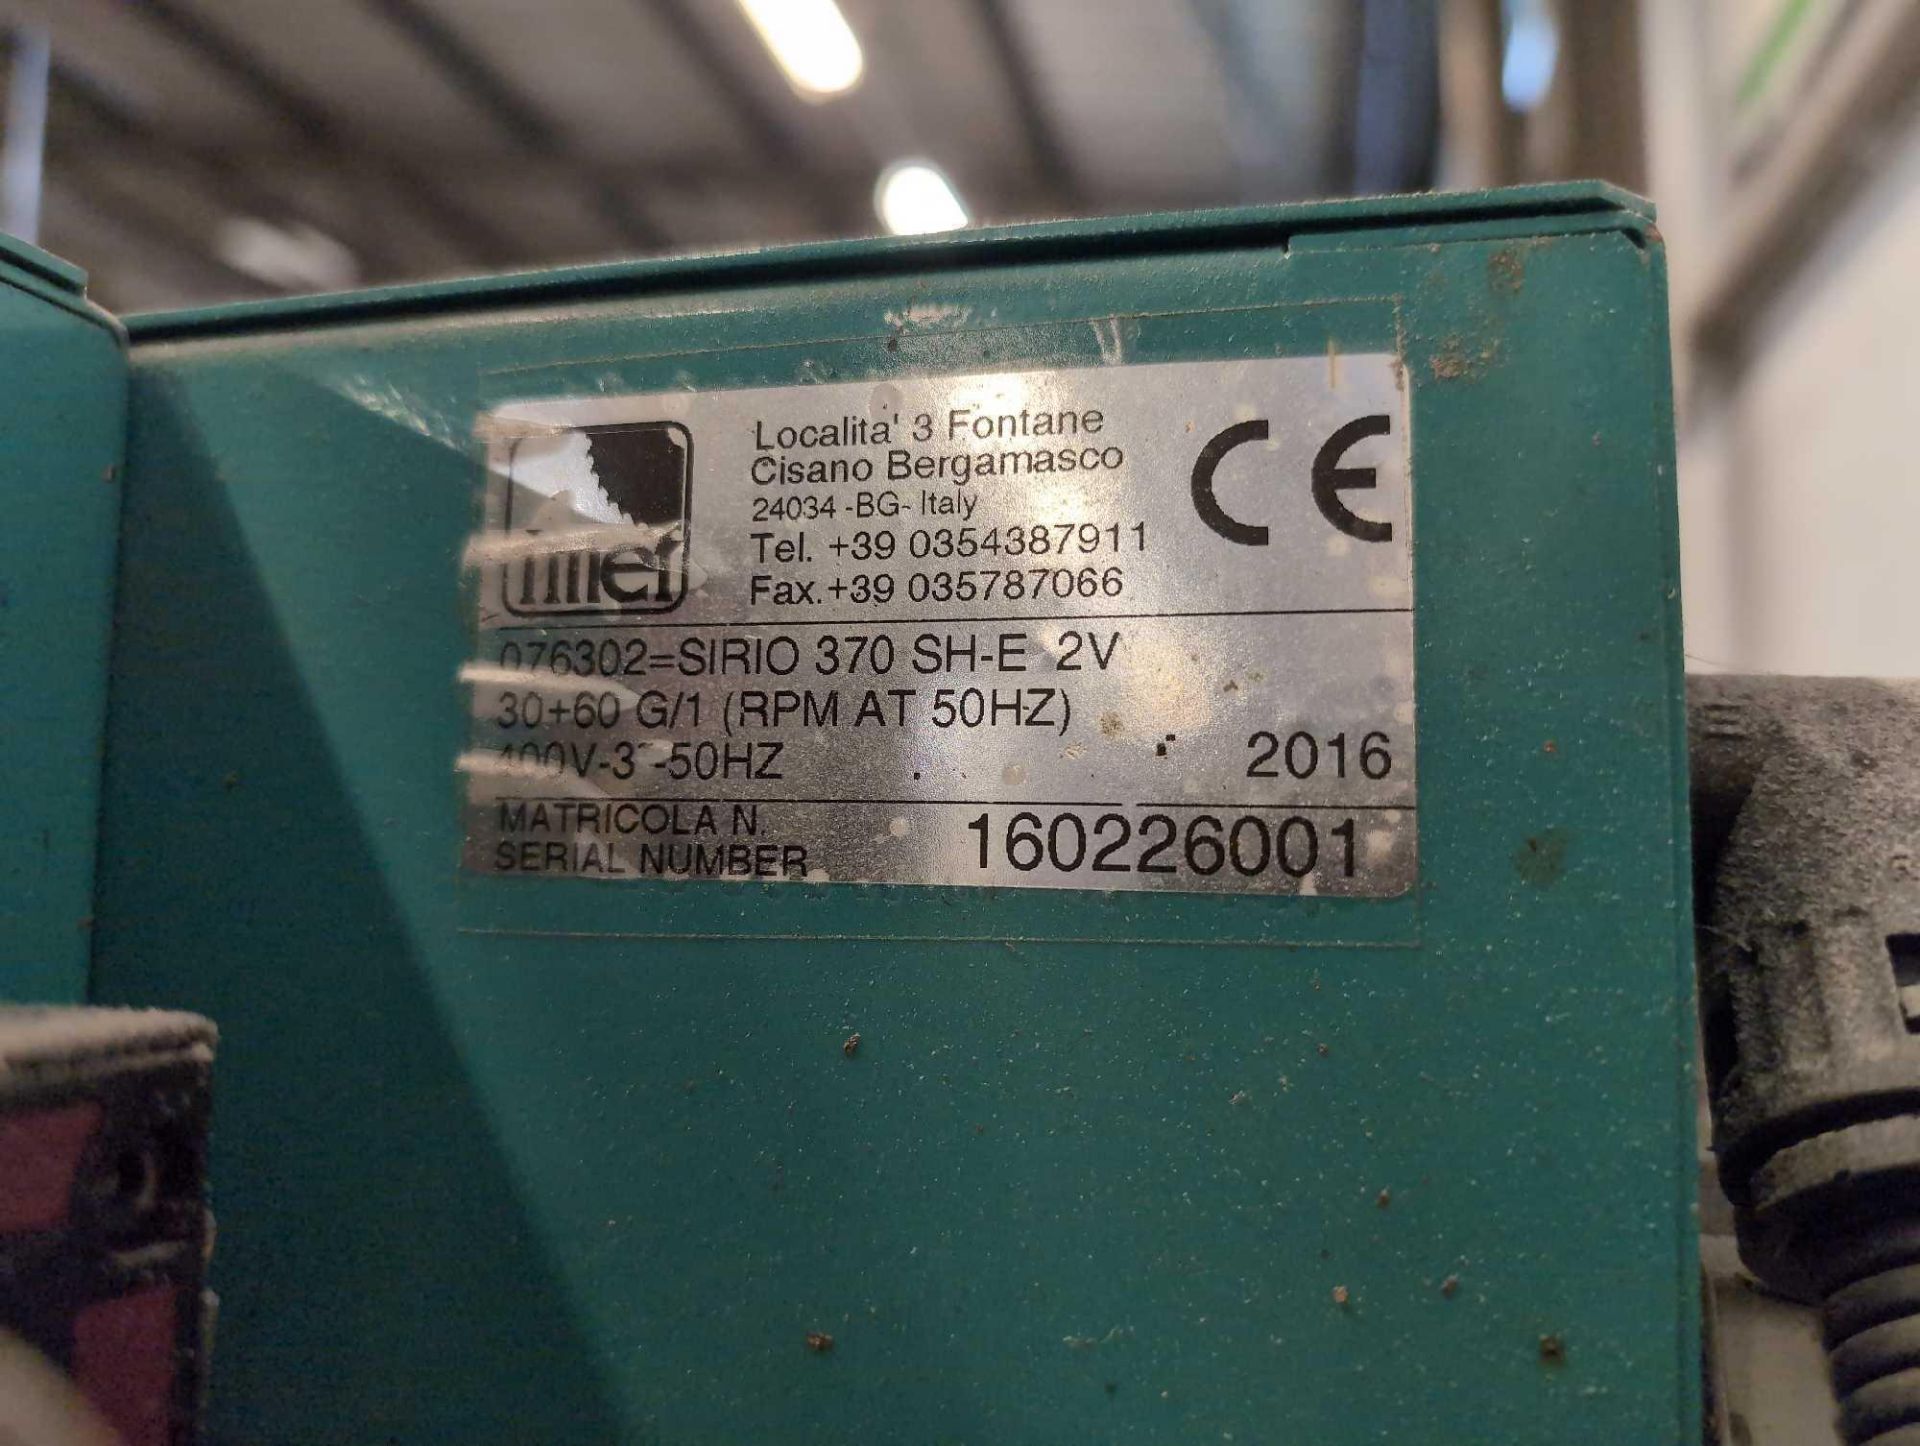 1: Addison , Sirio 370 imet, Circular Cold Saw, Serial Number: 160226001, Year of Manufacture: 2016